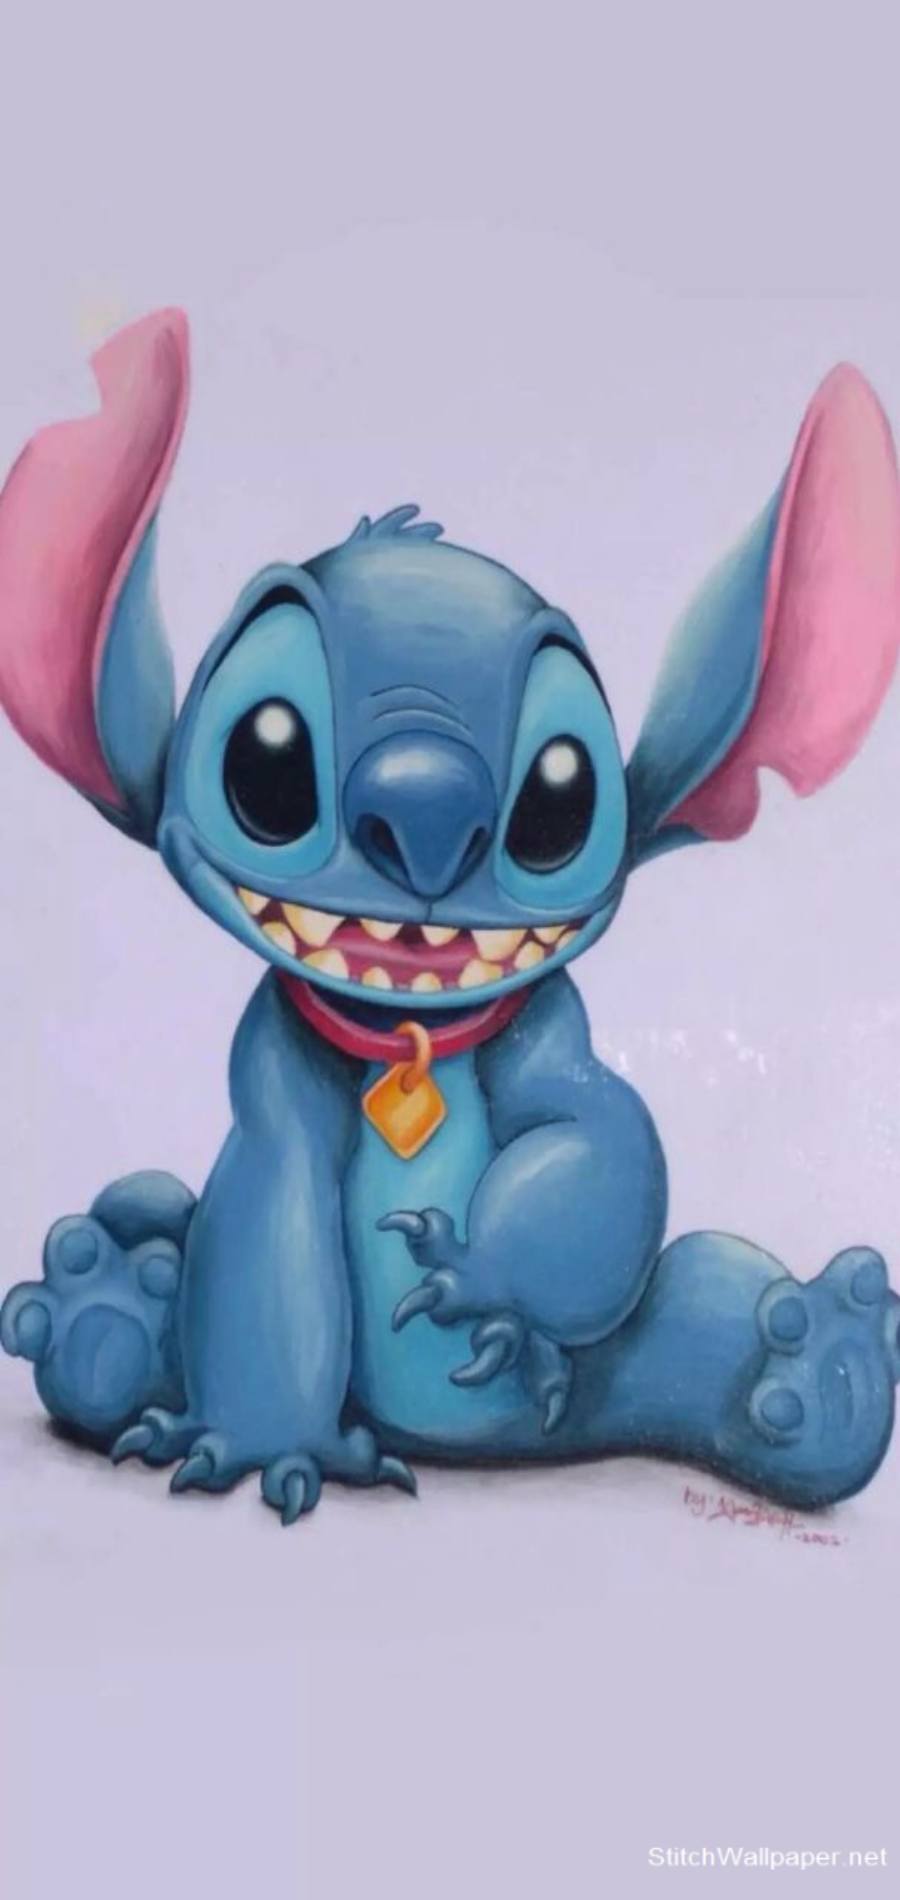 background cute stitch wallpapers